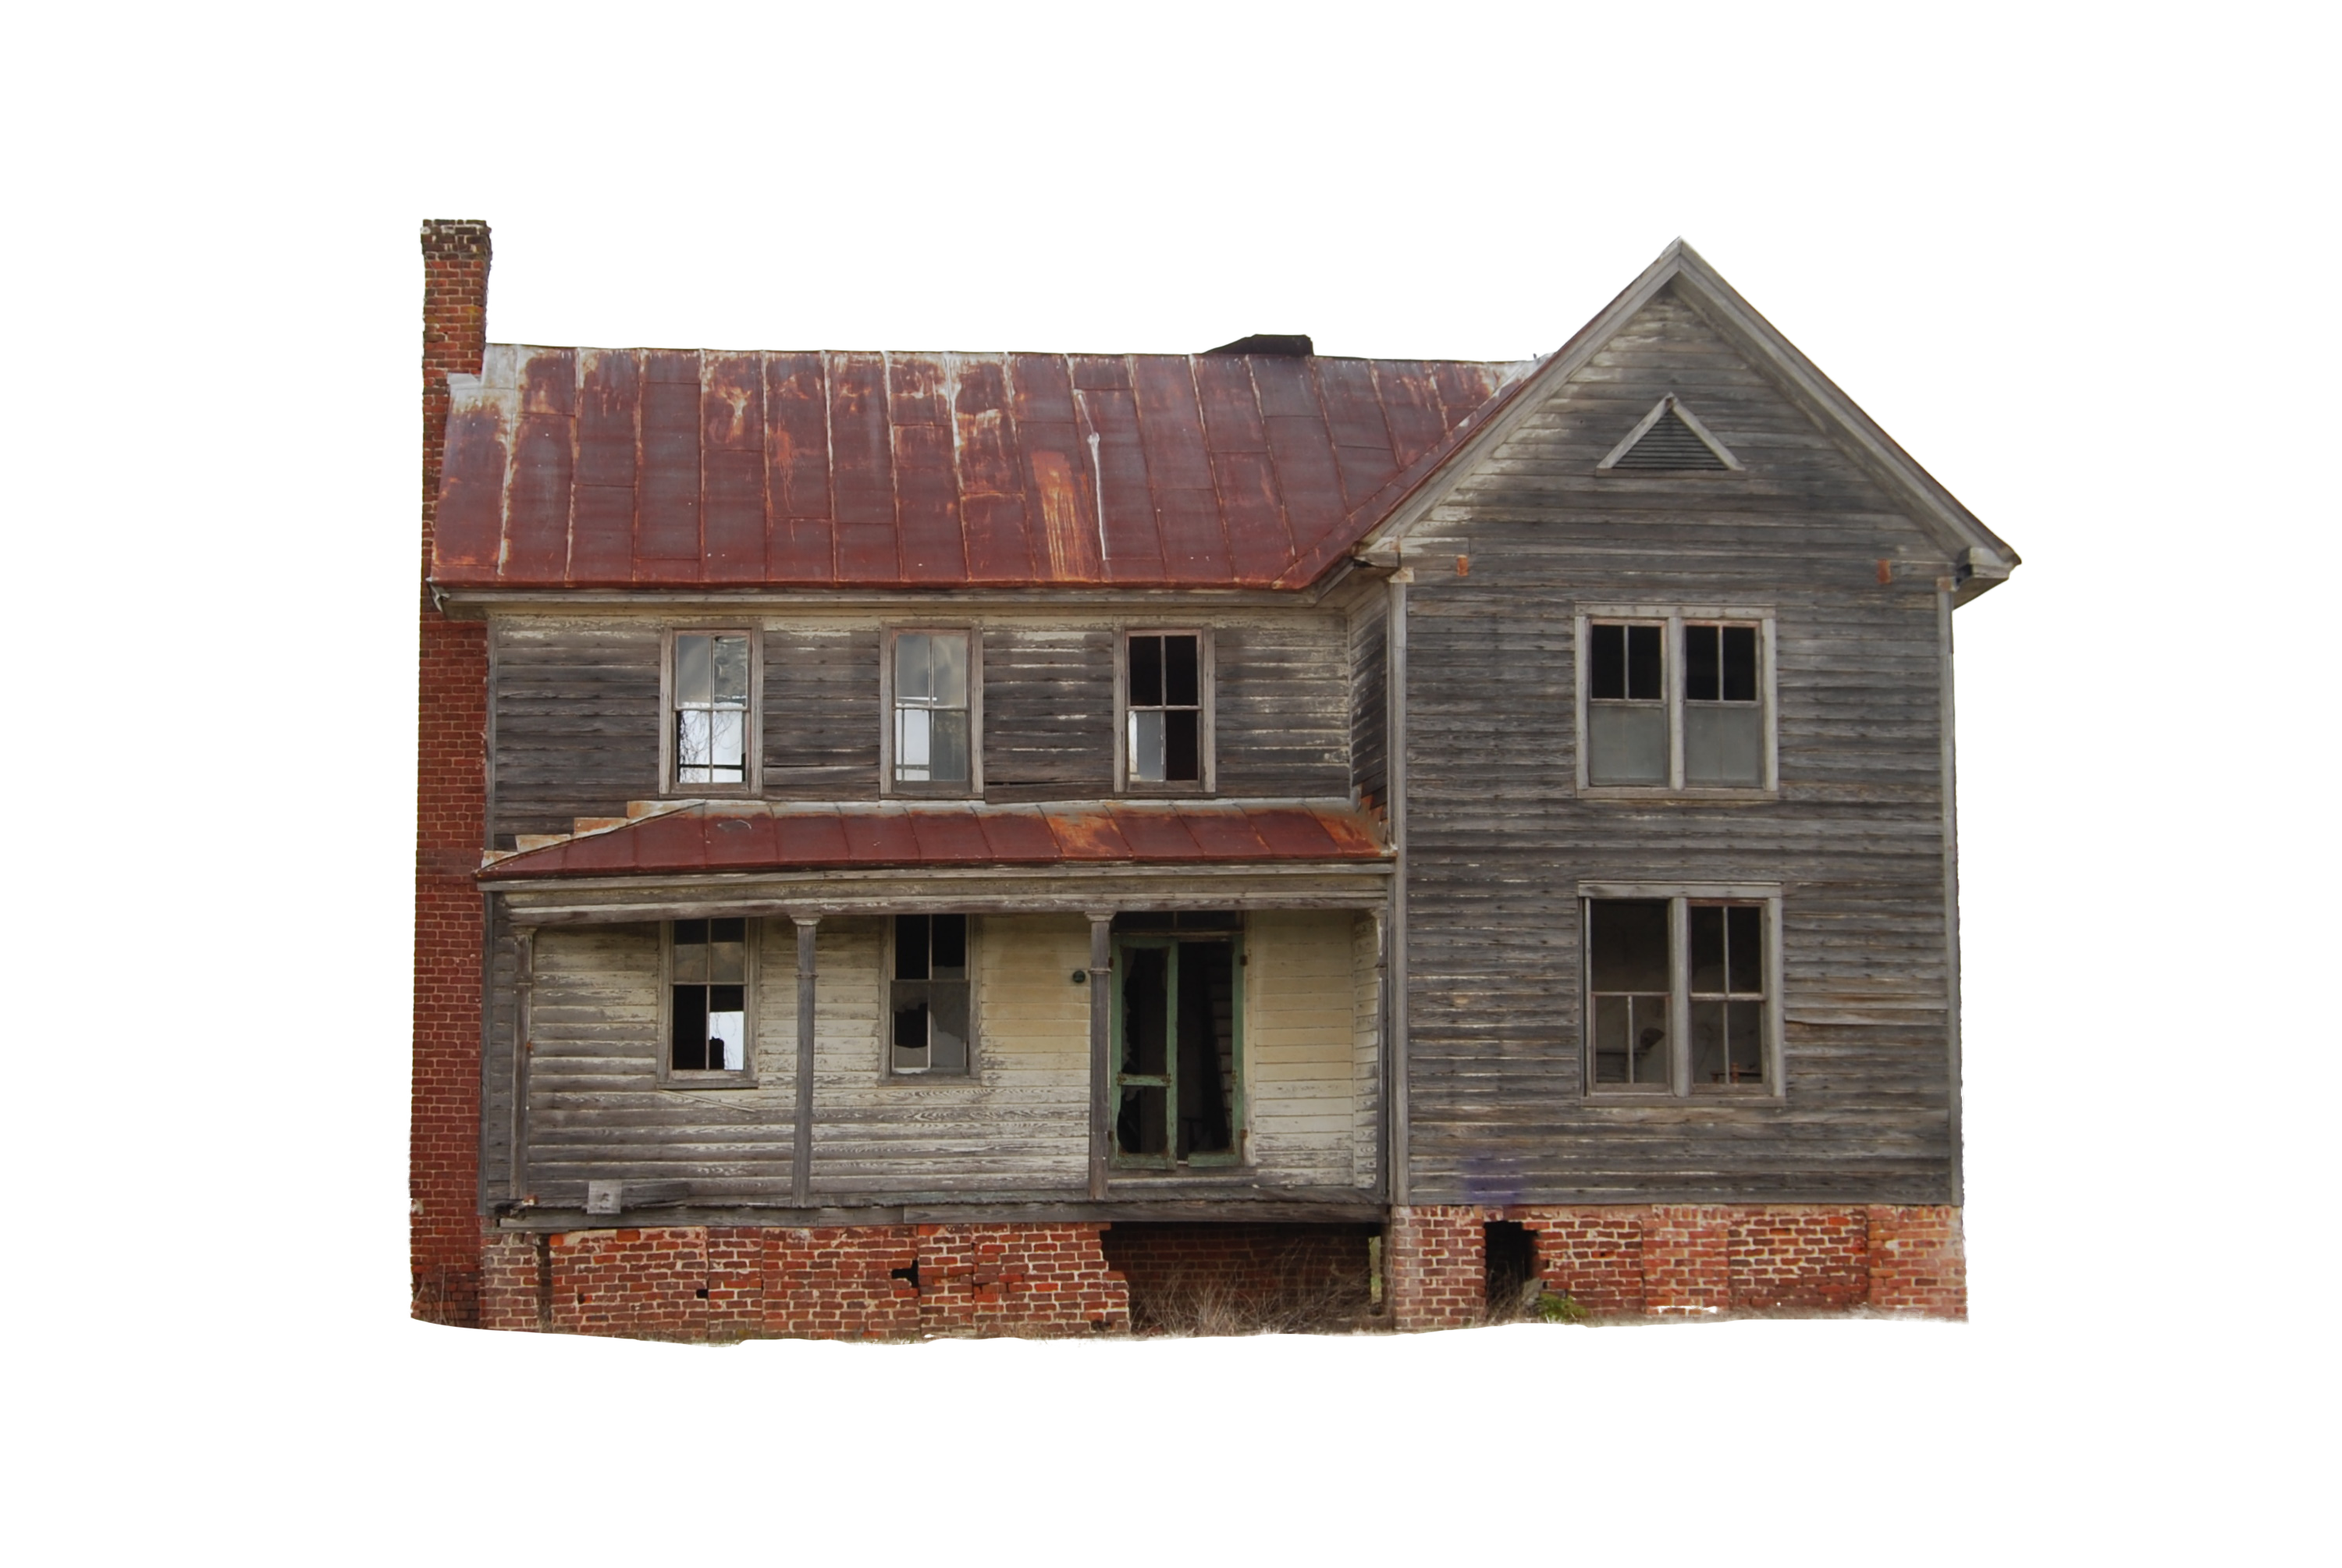 Wooden House PNG Free Image